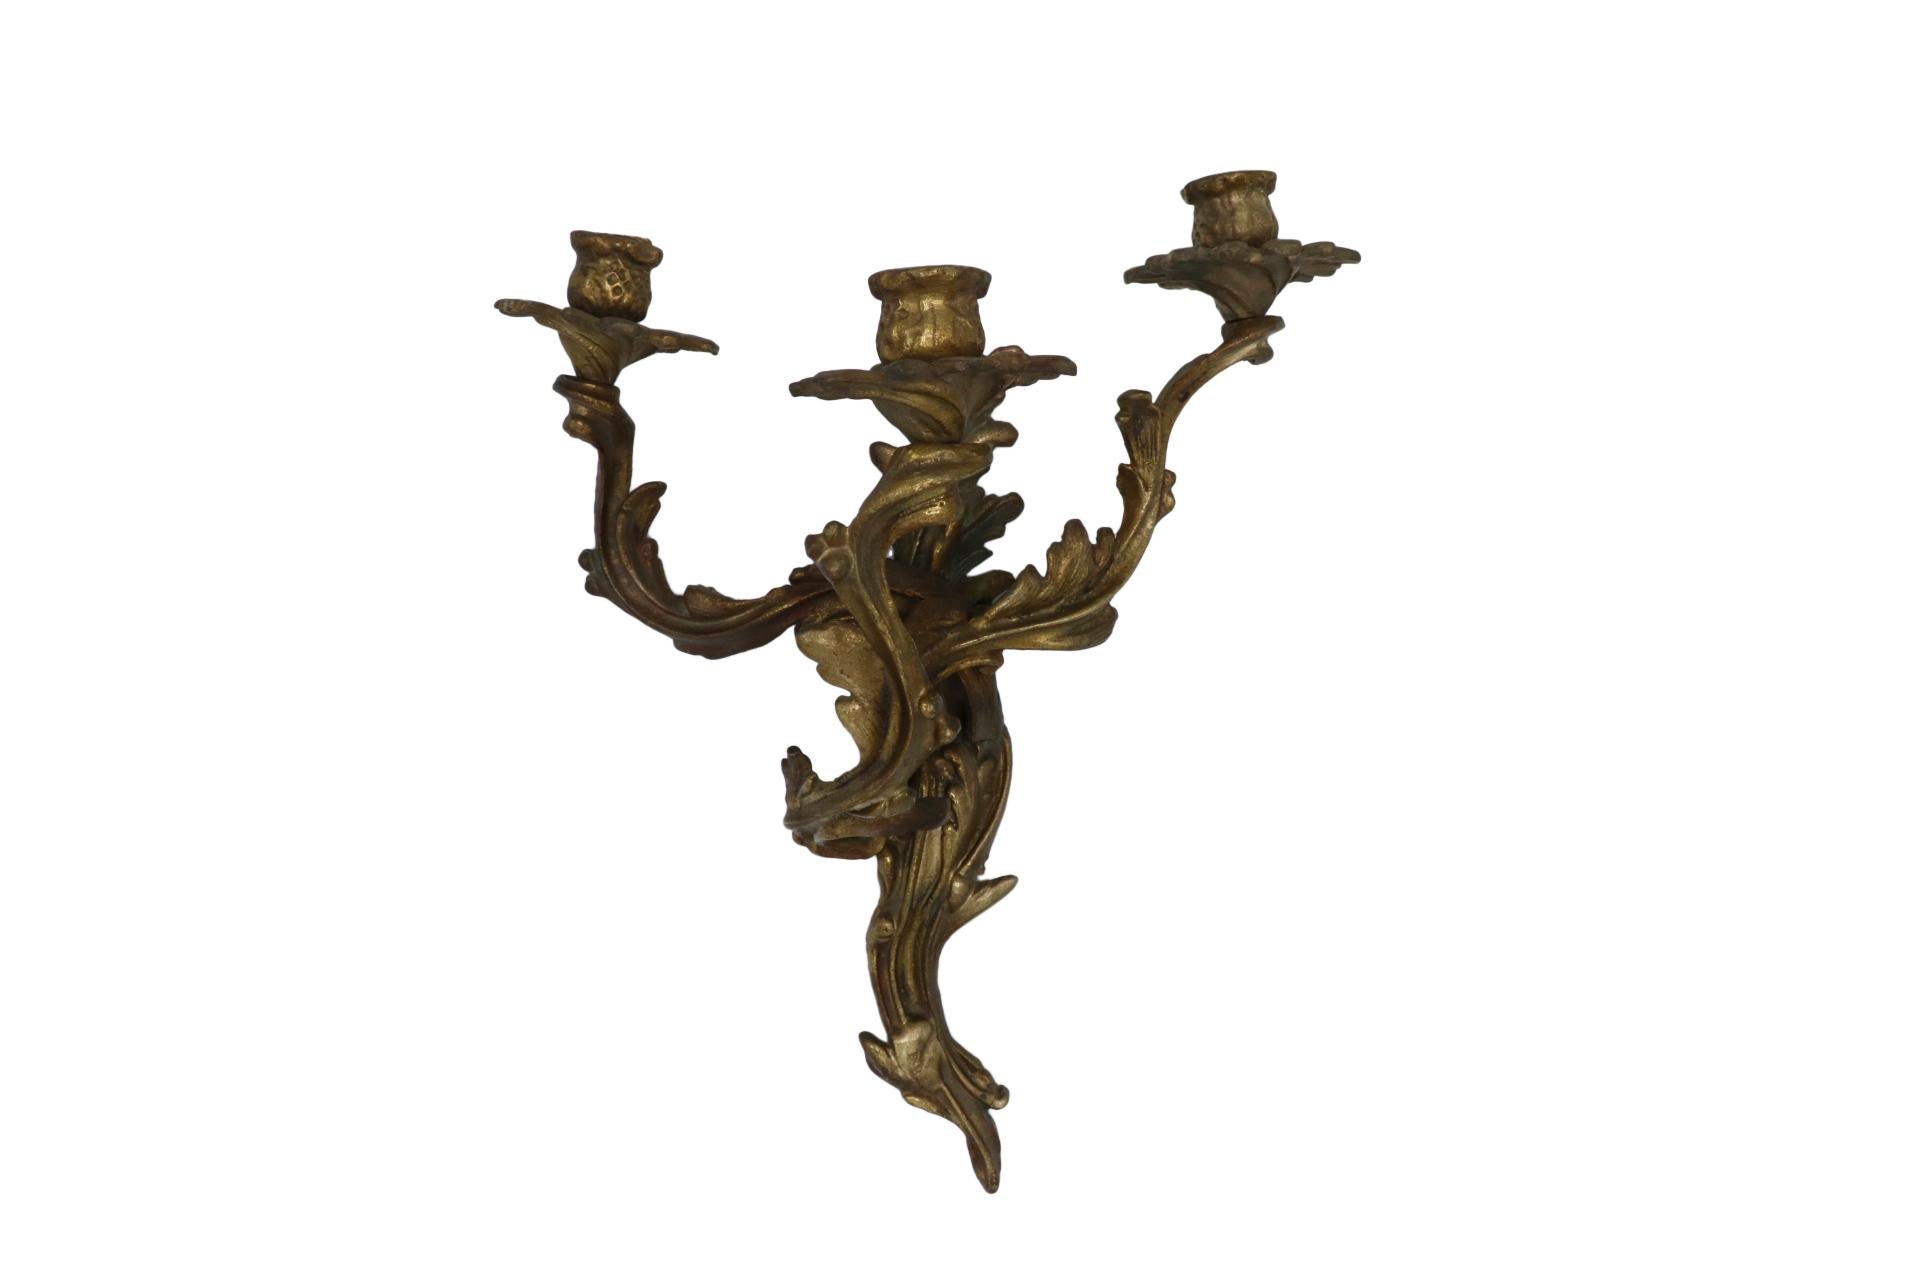 A pair of Louis XV style bronze sconces. Three asymmetric acanthus leaf arms scroll upward supporting floral wax pans and thistle shaped capitals. Dimensions per sconce.